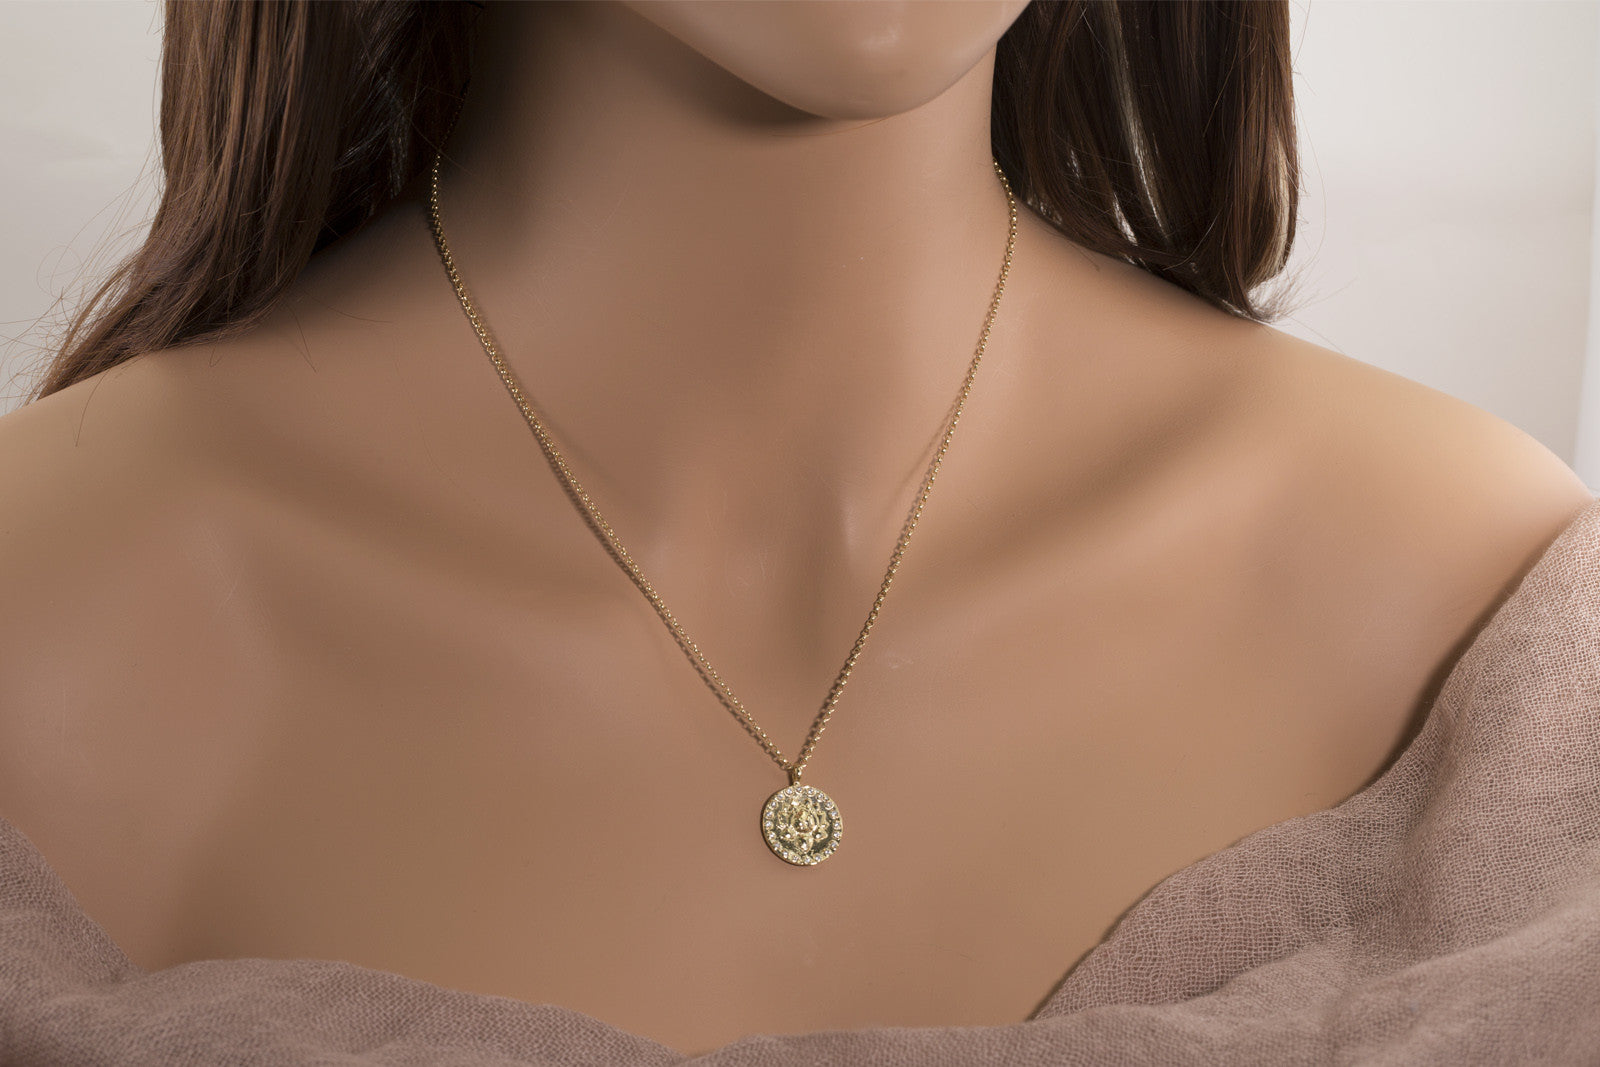 Lotus & Om Reversible Coin Necklace